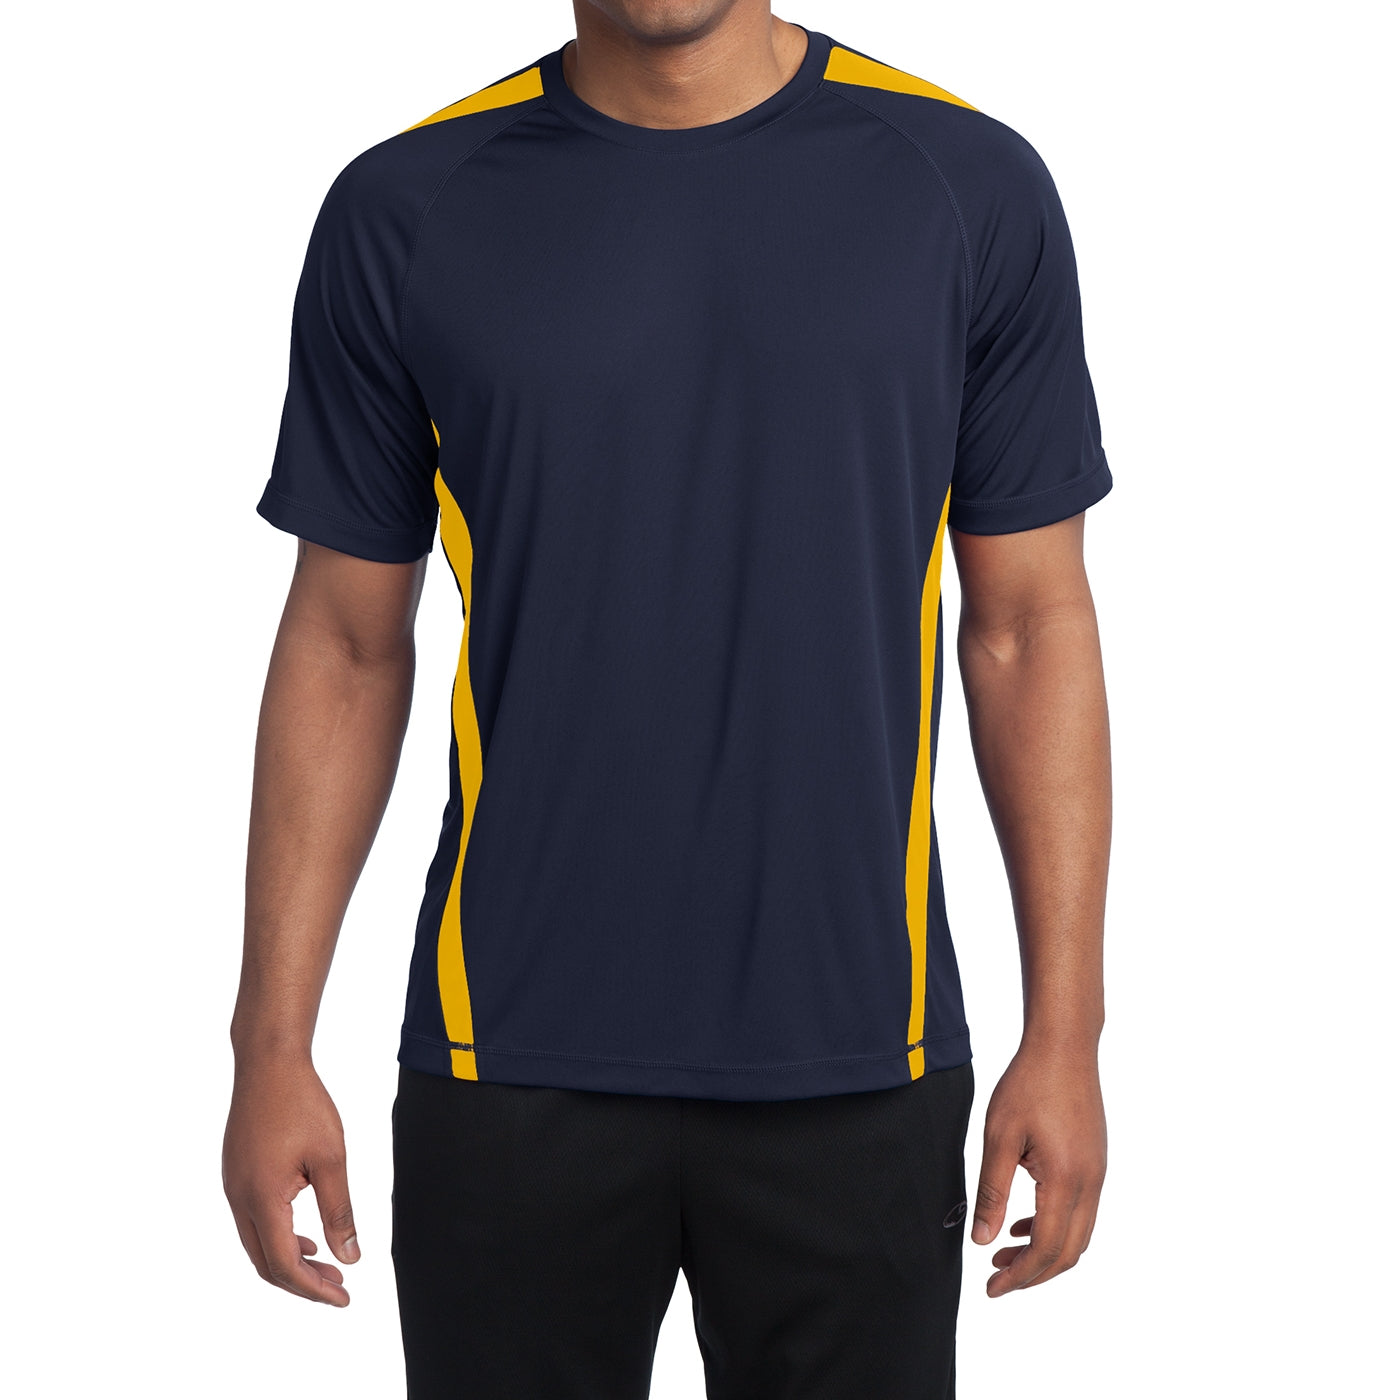 Men's Colorblock PosiCharge Competitor Tee - True Navy/ Gold